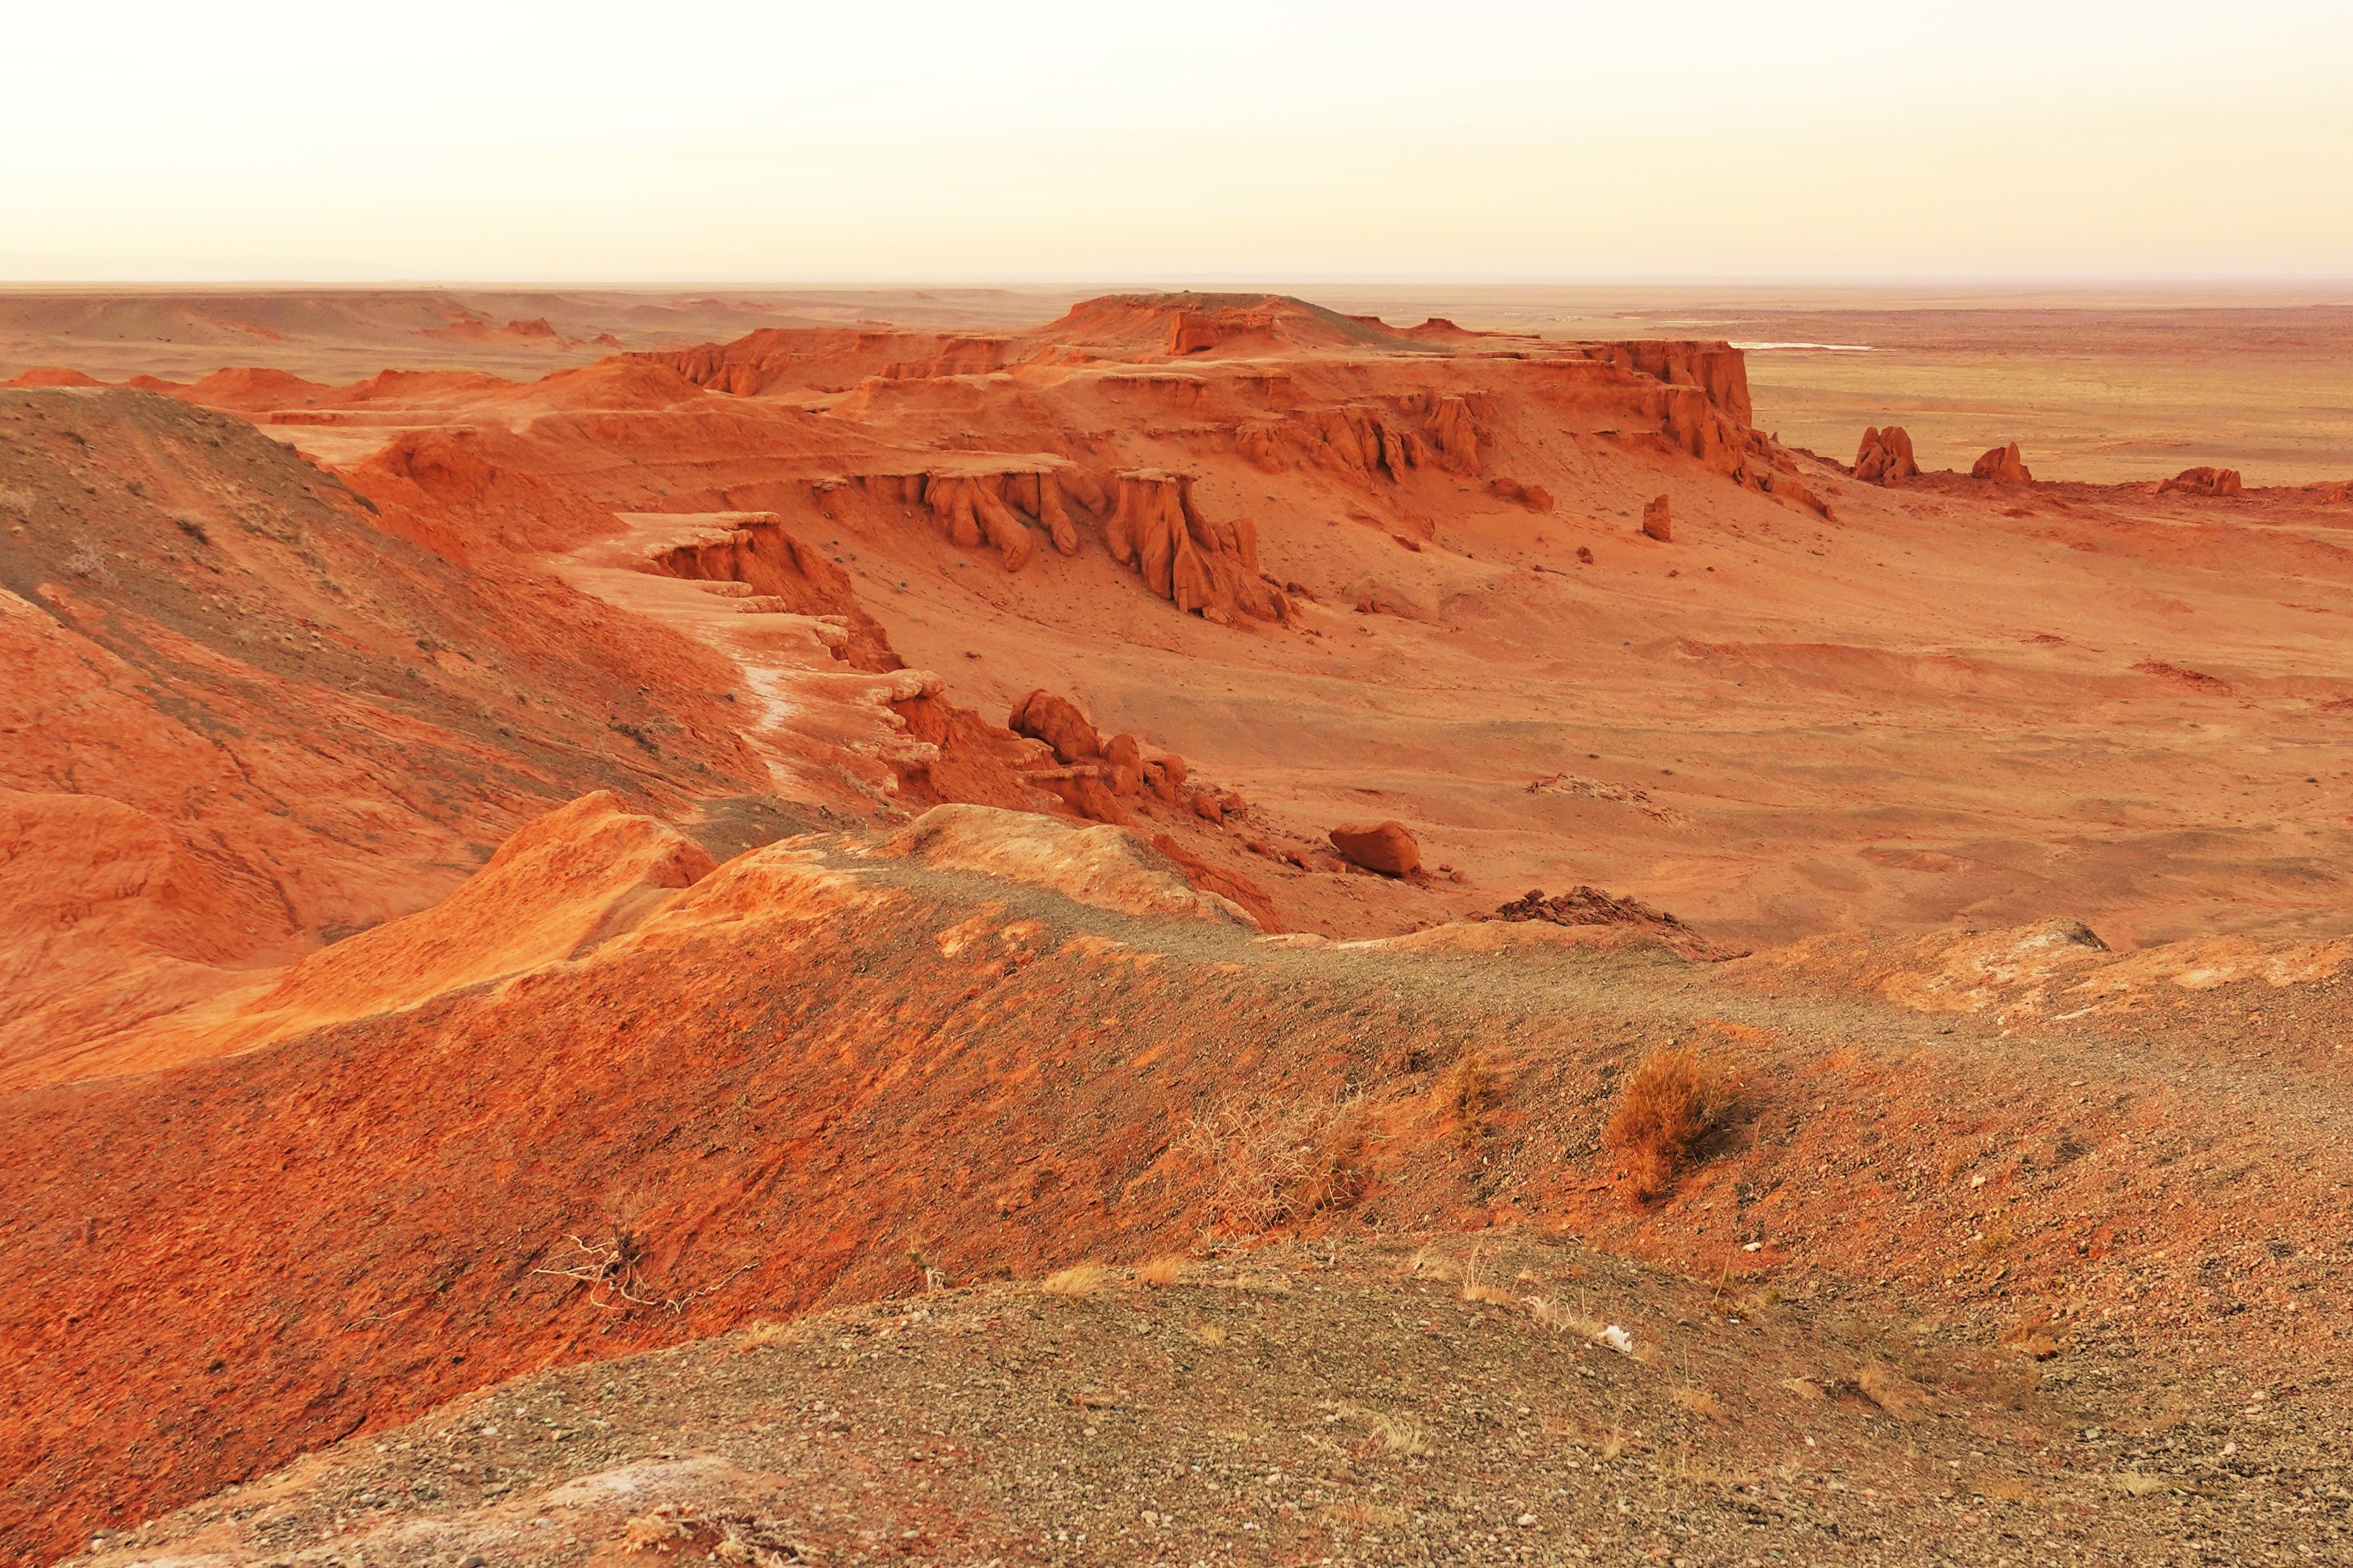 At the Flaming Cliffs in Mongolia's Gobi